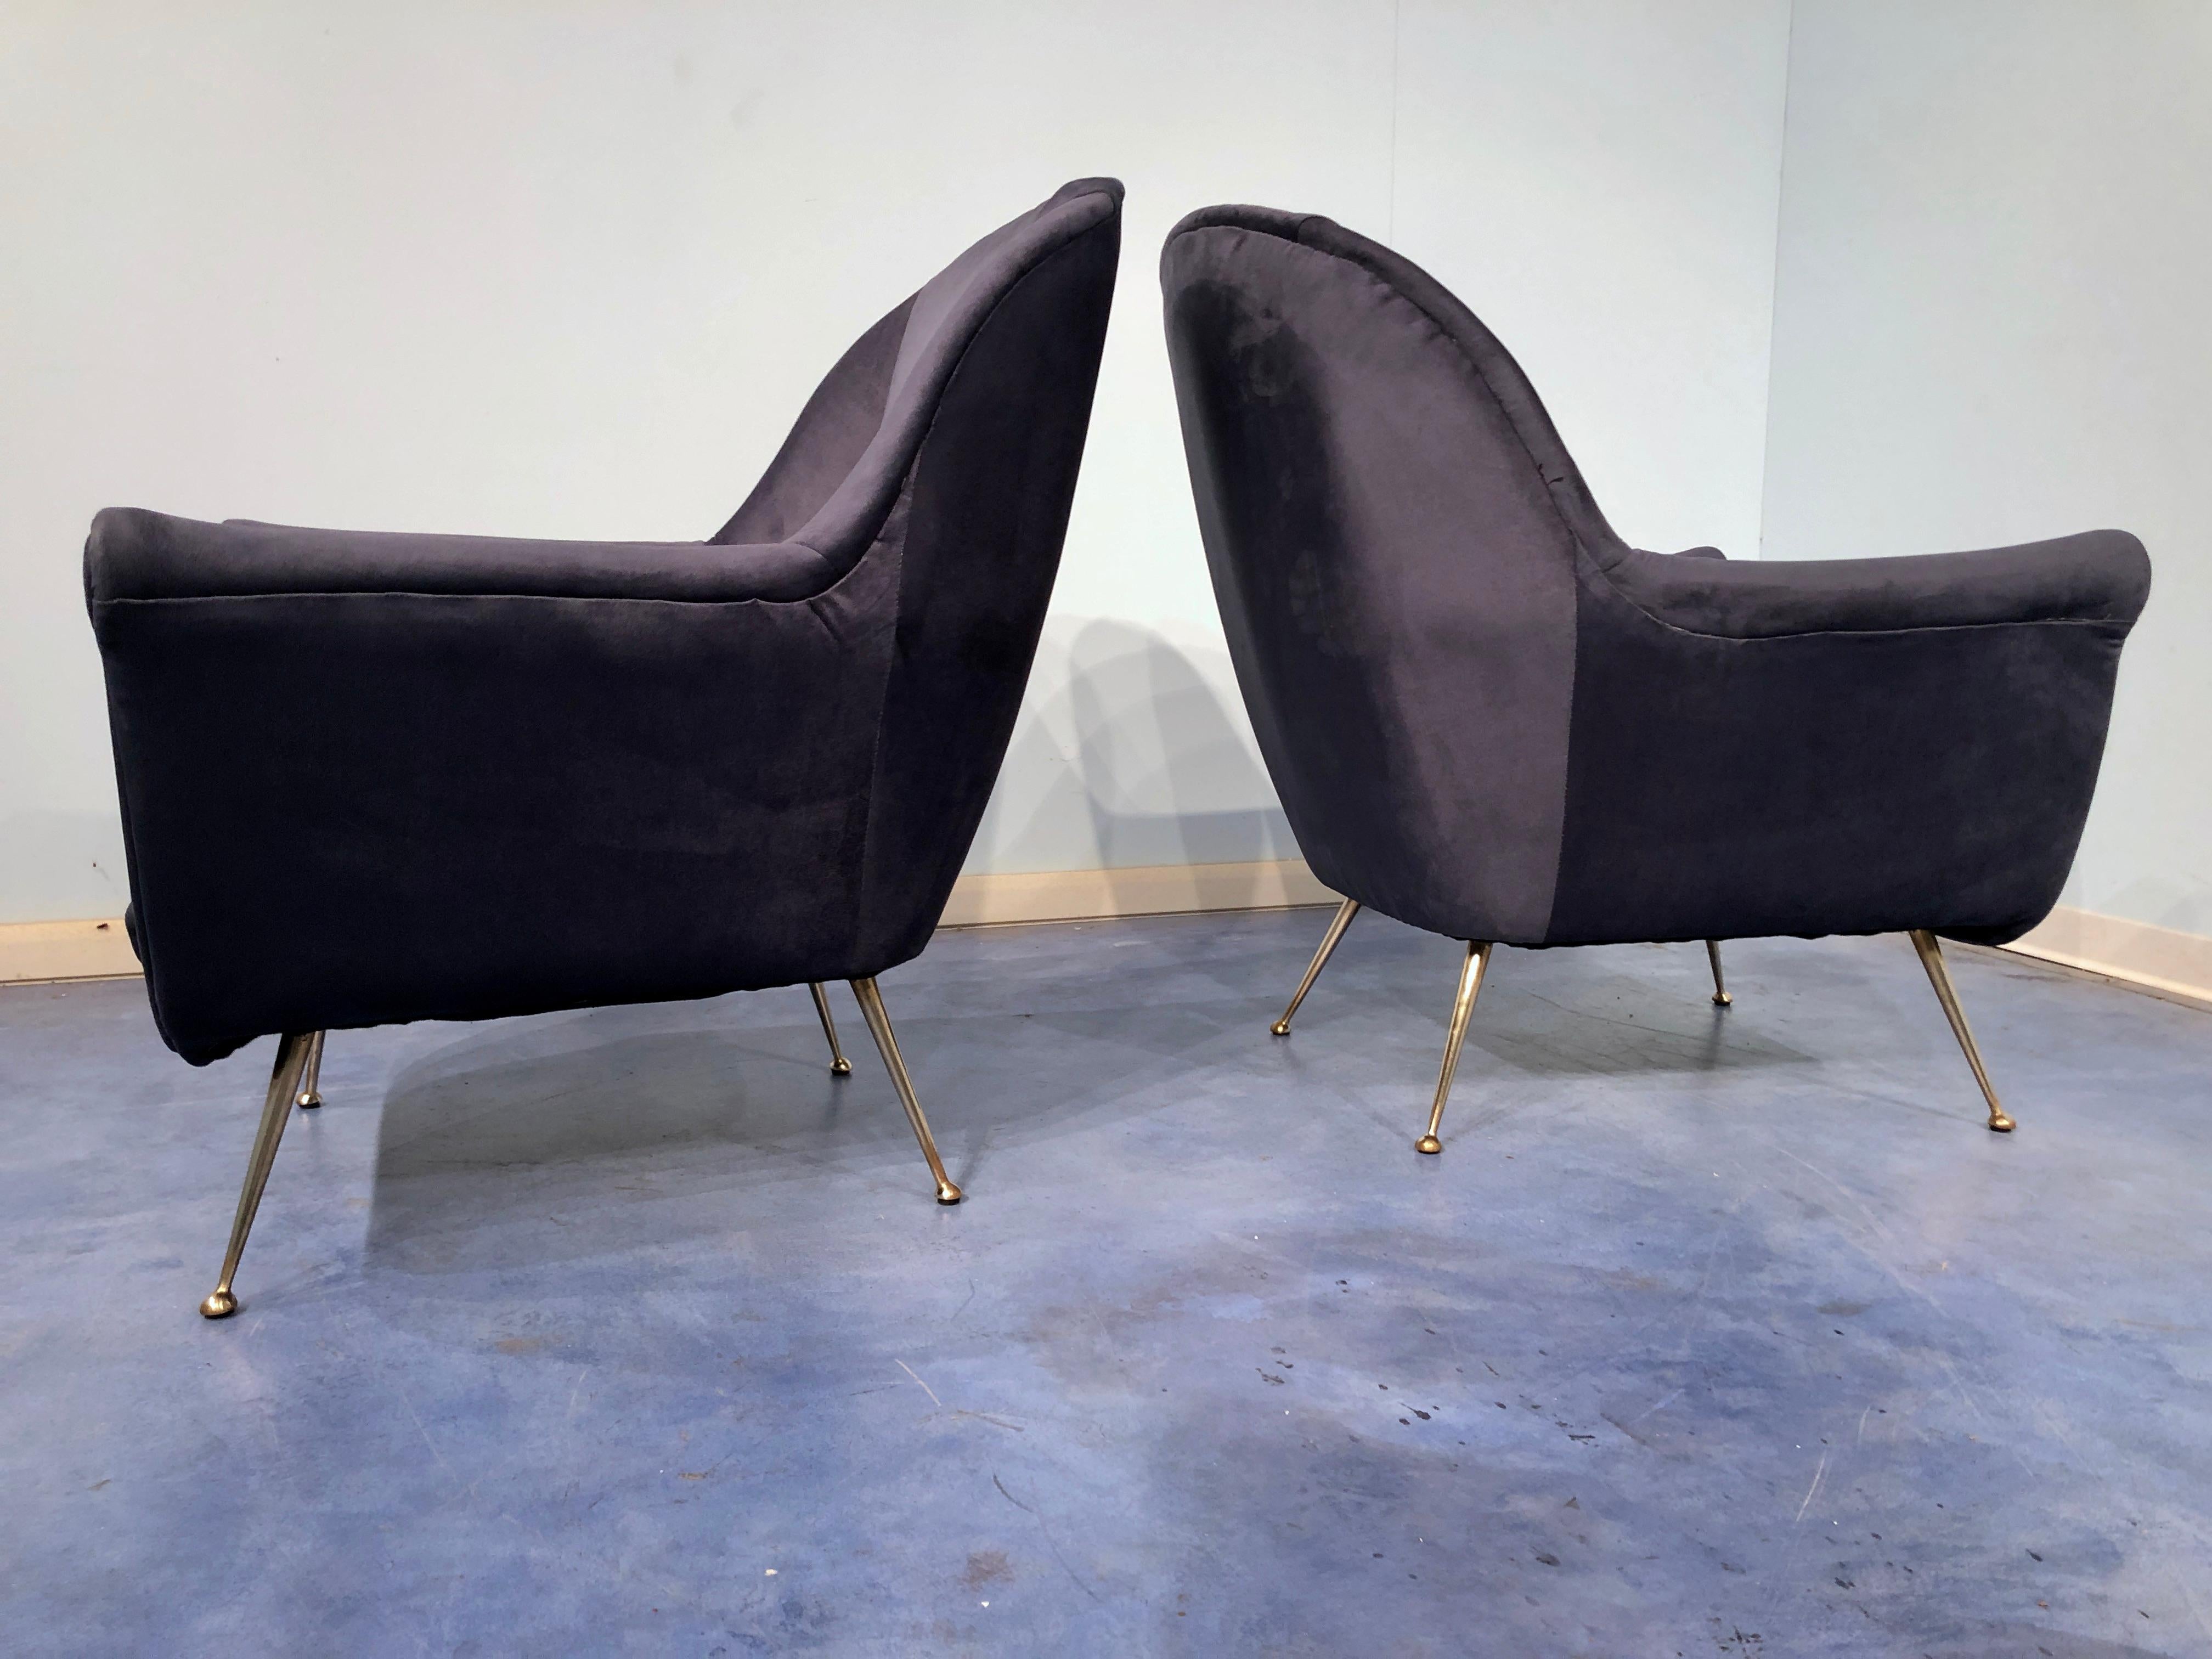 Pair of Italian Midcentury Midnight Blue Velvet Armchairs, Gio Ponti Style 1950s In Good Condition For Sale In Traversetolo, IT